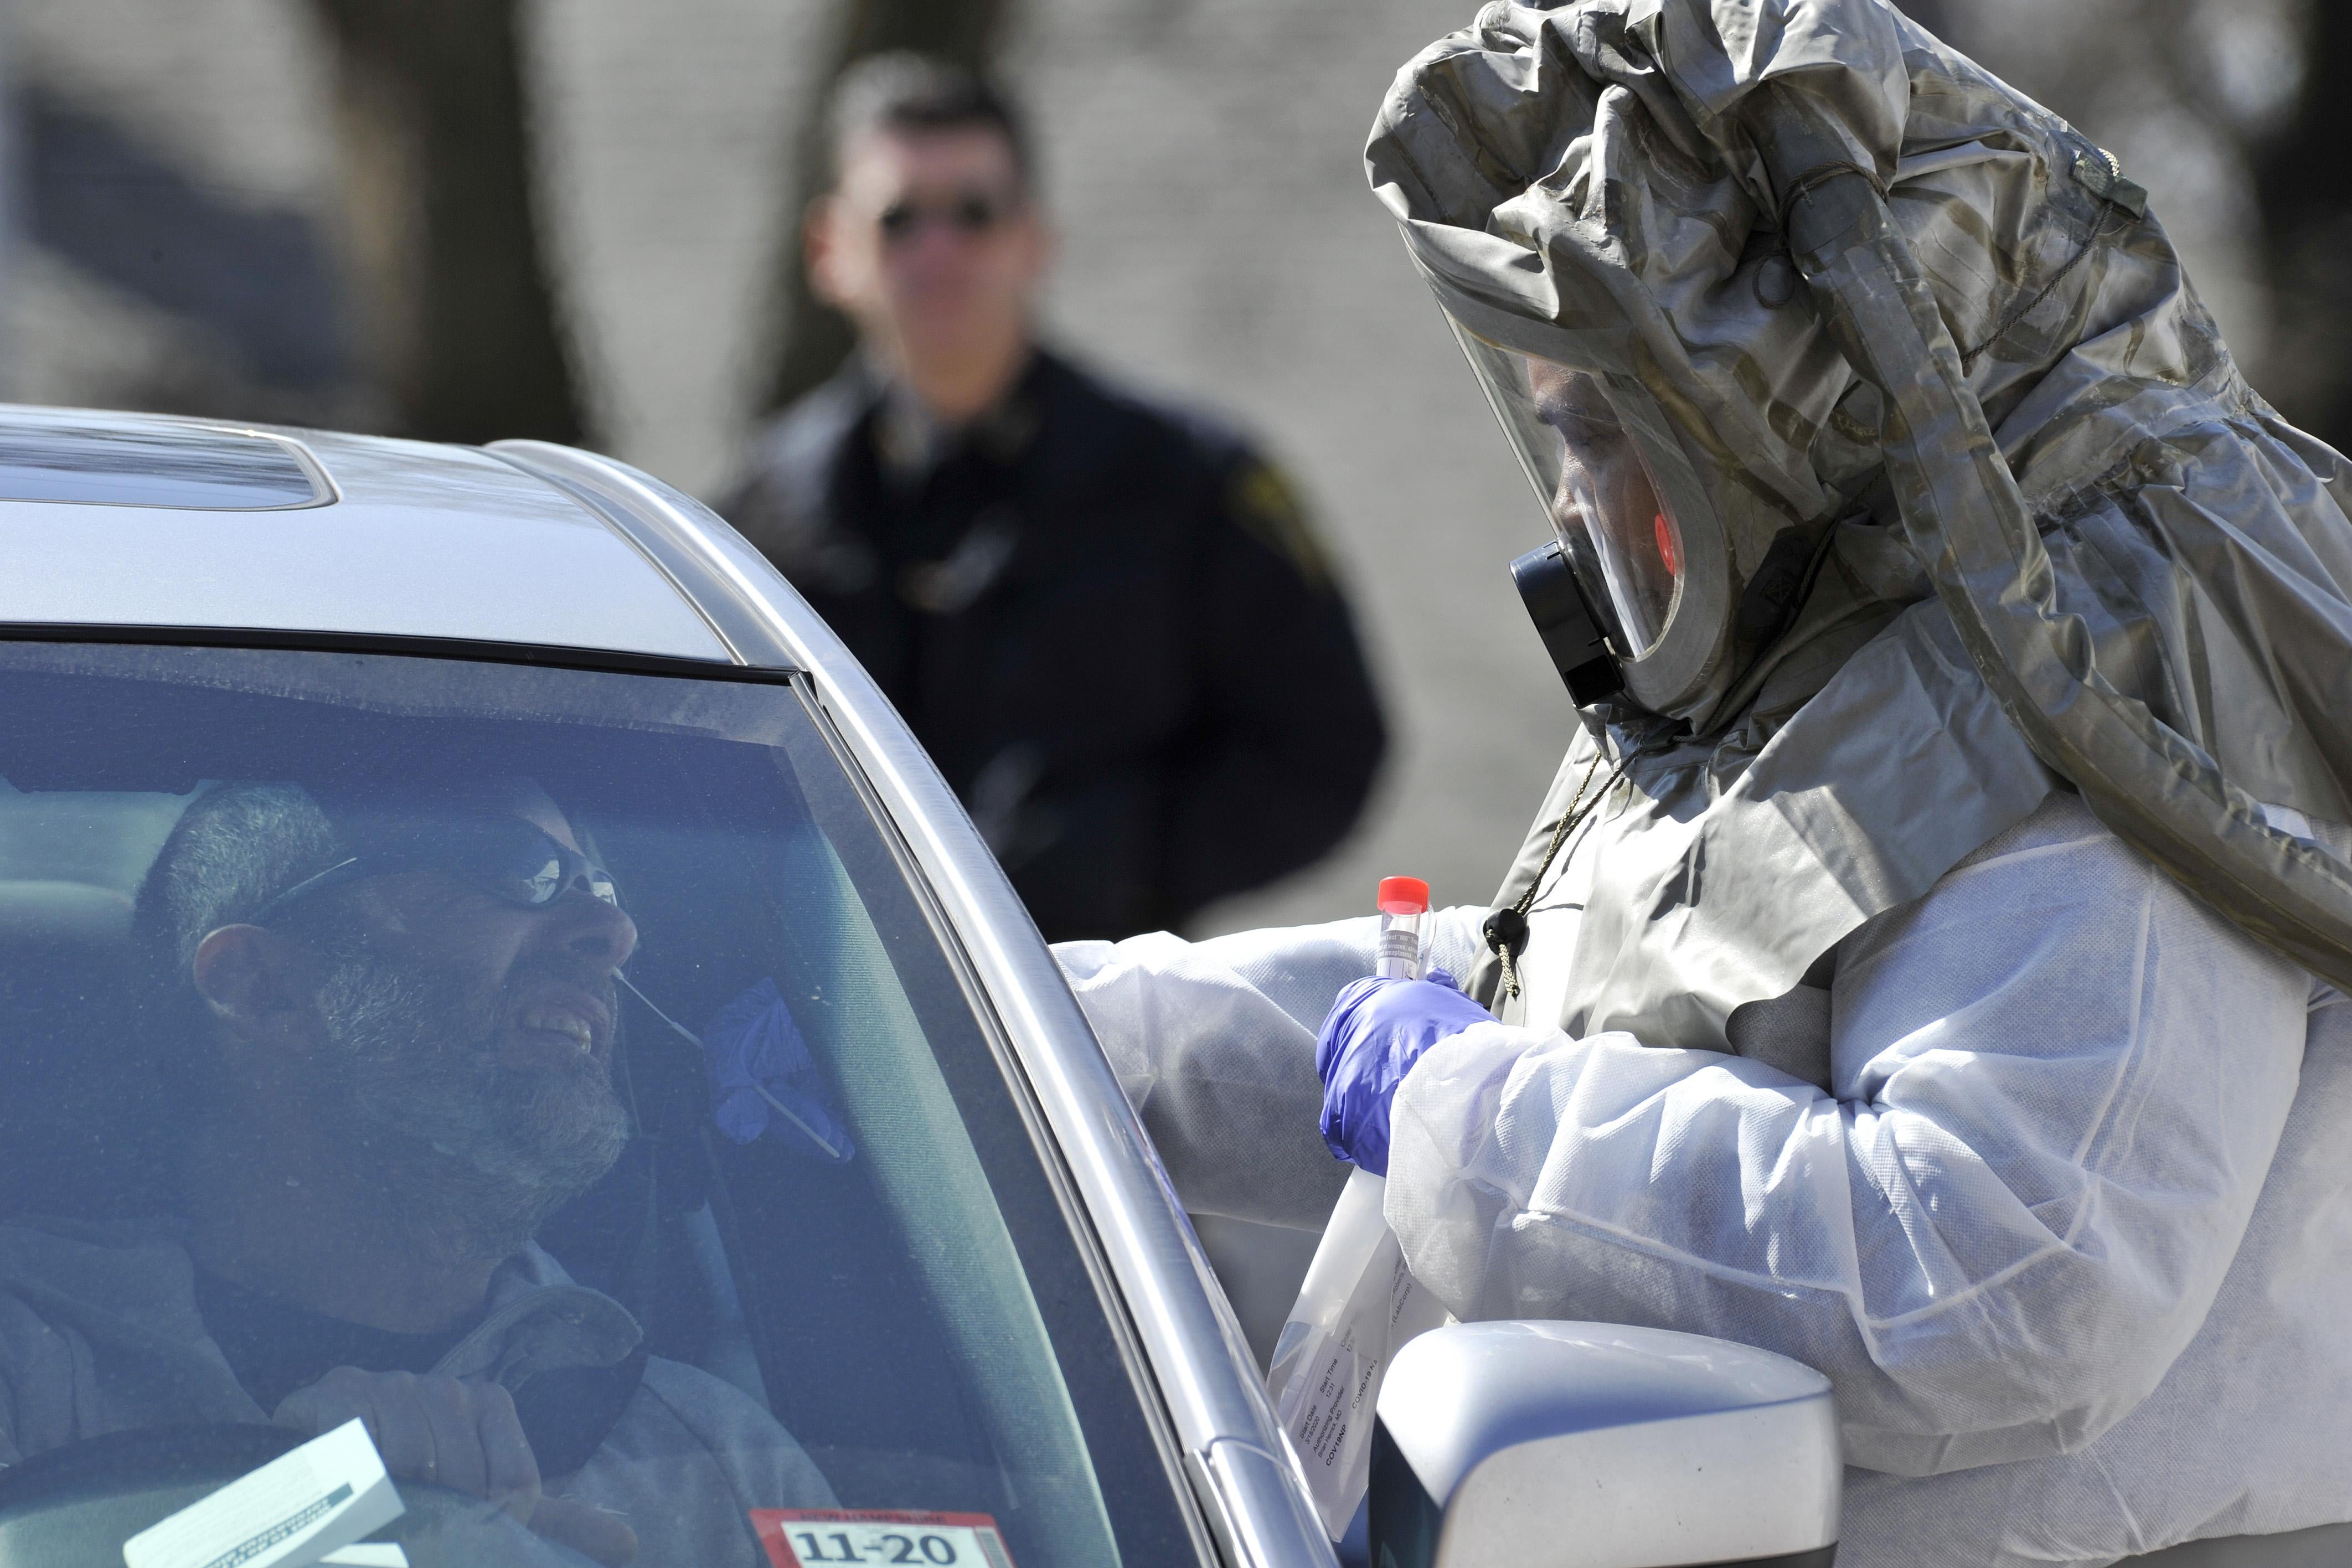 A man sits in his car with his face angled up as a person in protective gear takes a swab of his nose.